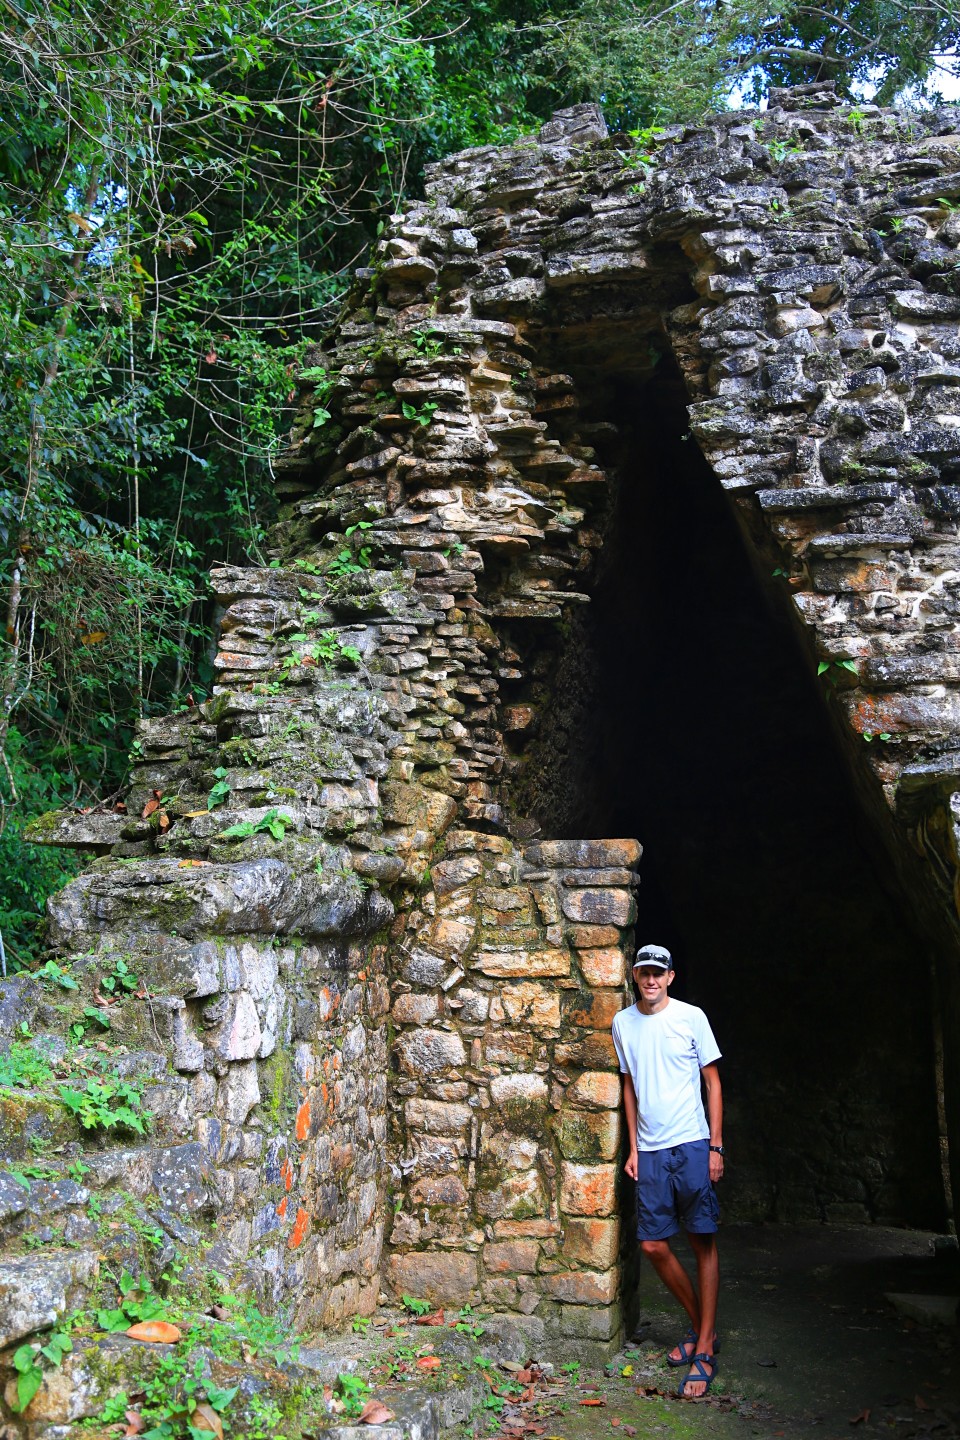 Sam posing in front of the false Mayan arch. We saw a lot of these since this ruin.